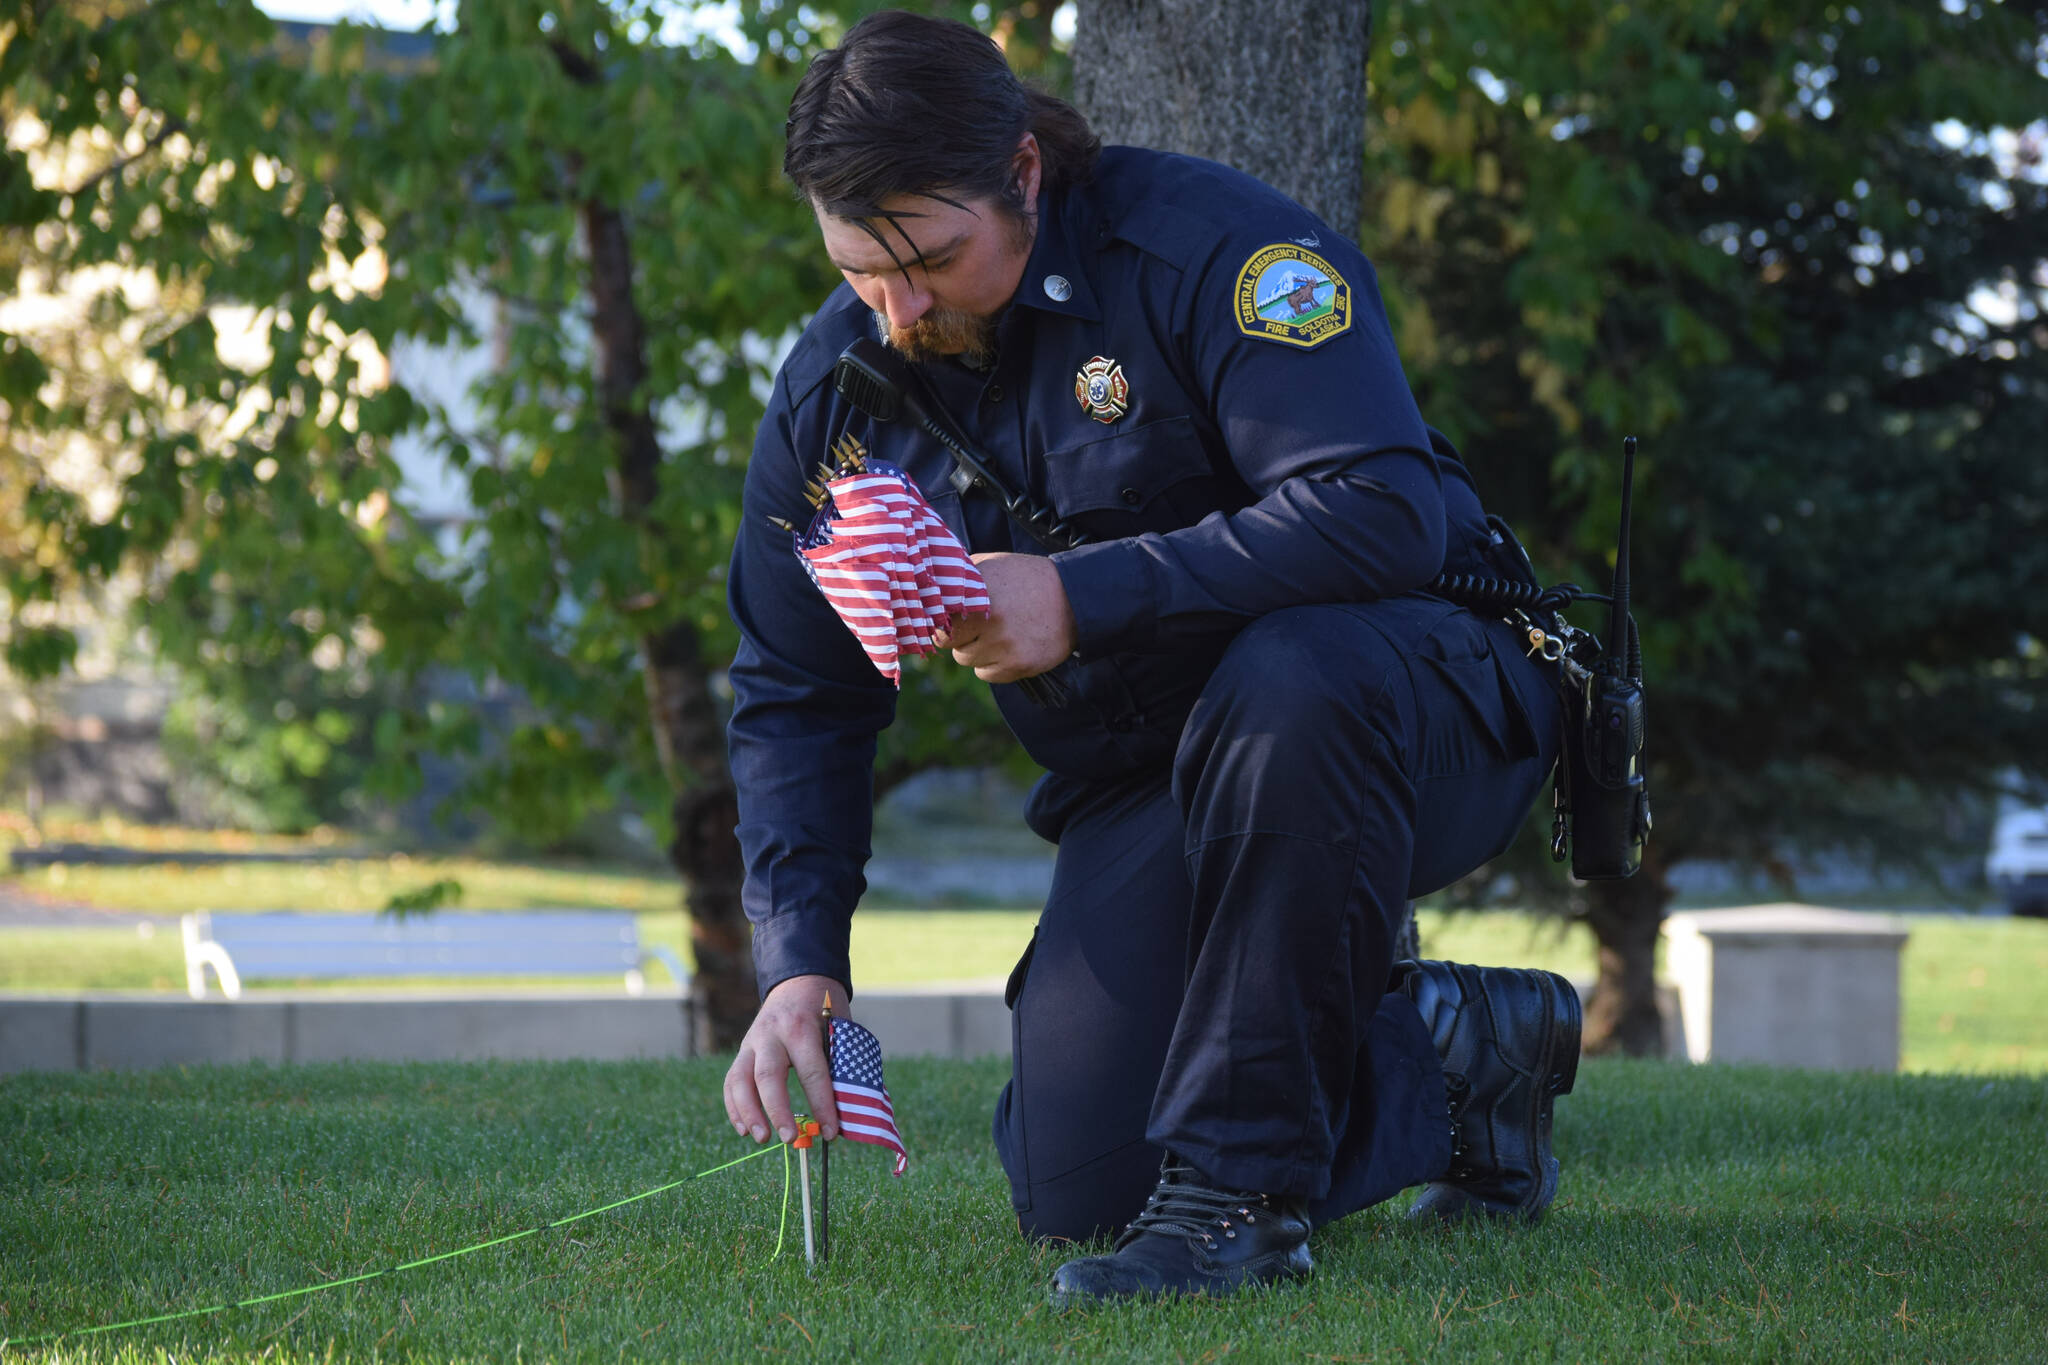 A firefighter with Central Emergency Services in Soldotna places an American flag in front of the station. Firefighters set over 400 flags in the grass outside CES in Soldotna on Saturday, Sept. 11, 2021 in honor of the first responders who died in the 9/11 terrorist attacks. (Camille Botello/Peninsula Clarion)